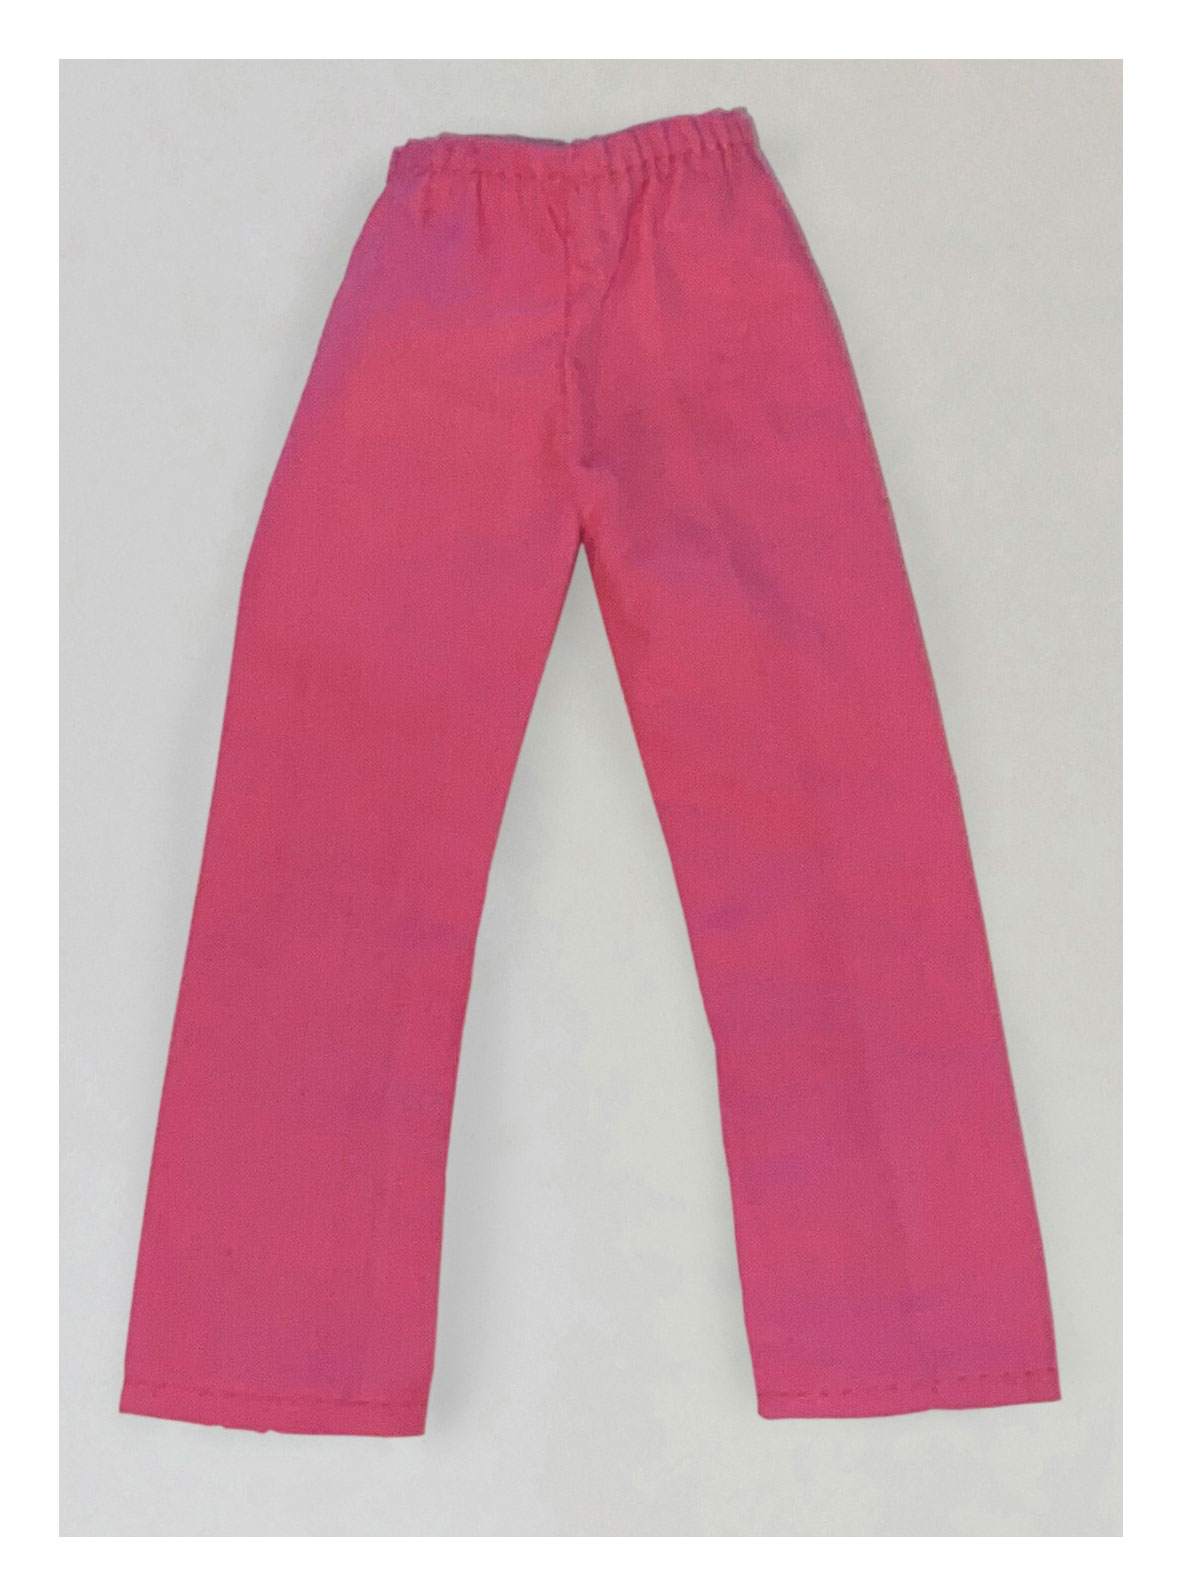 1971-73 Casual All Stars slacks (Taiwan) from online auction